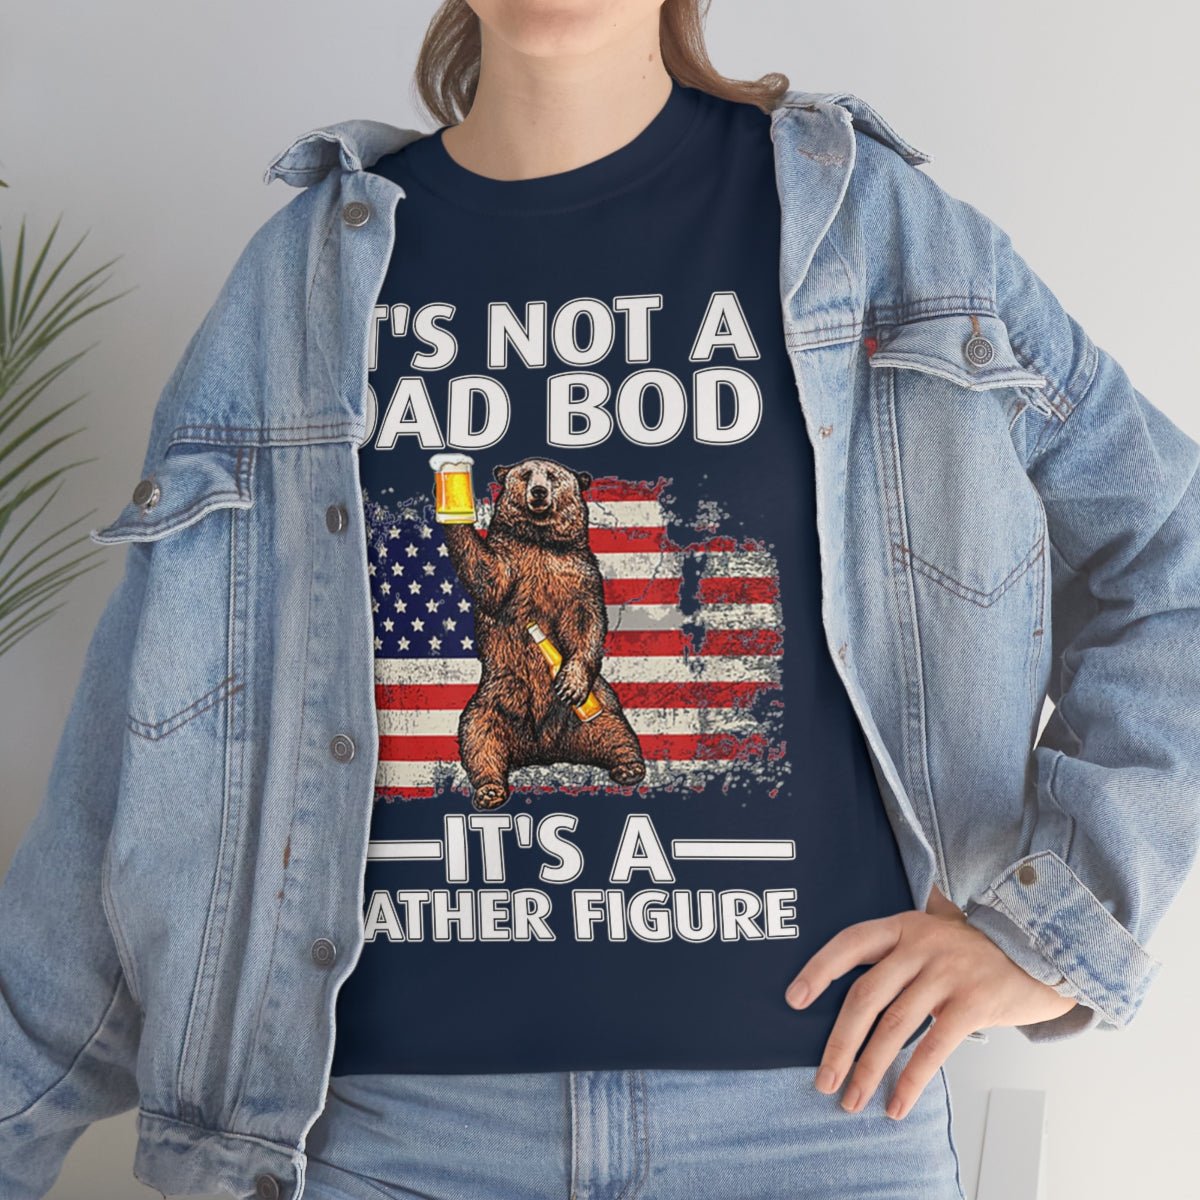 Salty Medic It's Not A Dad Bod Heavy Cotton Tee - Salty Medic Clothing Co.